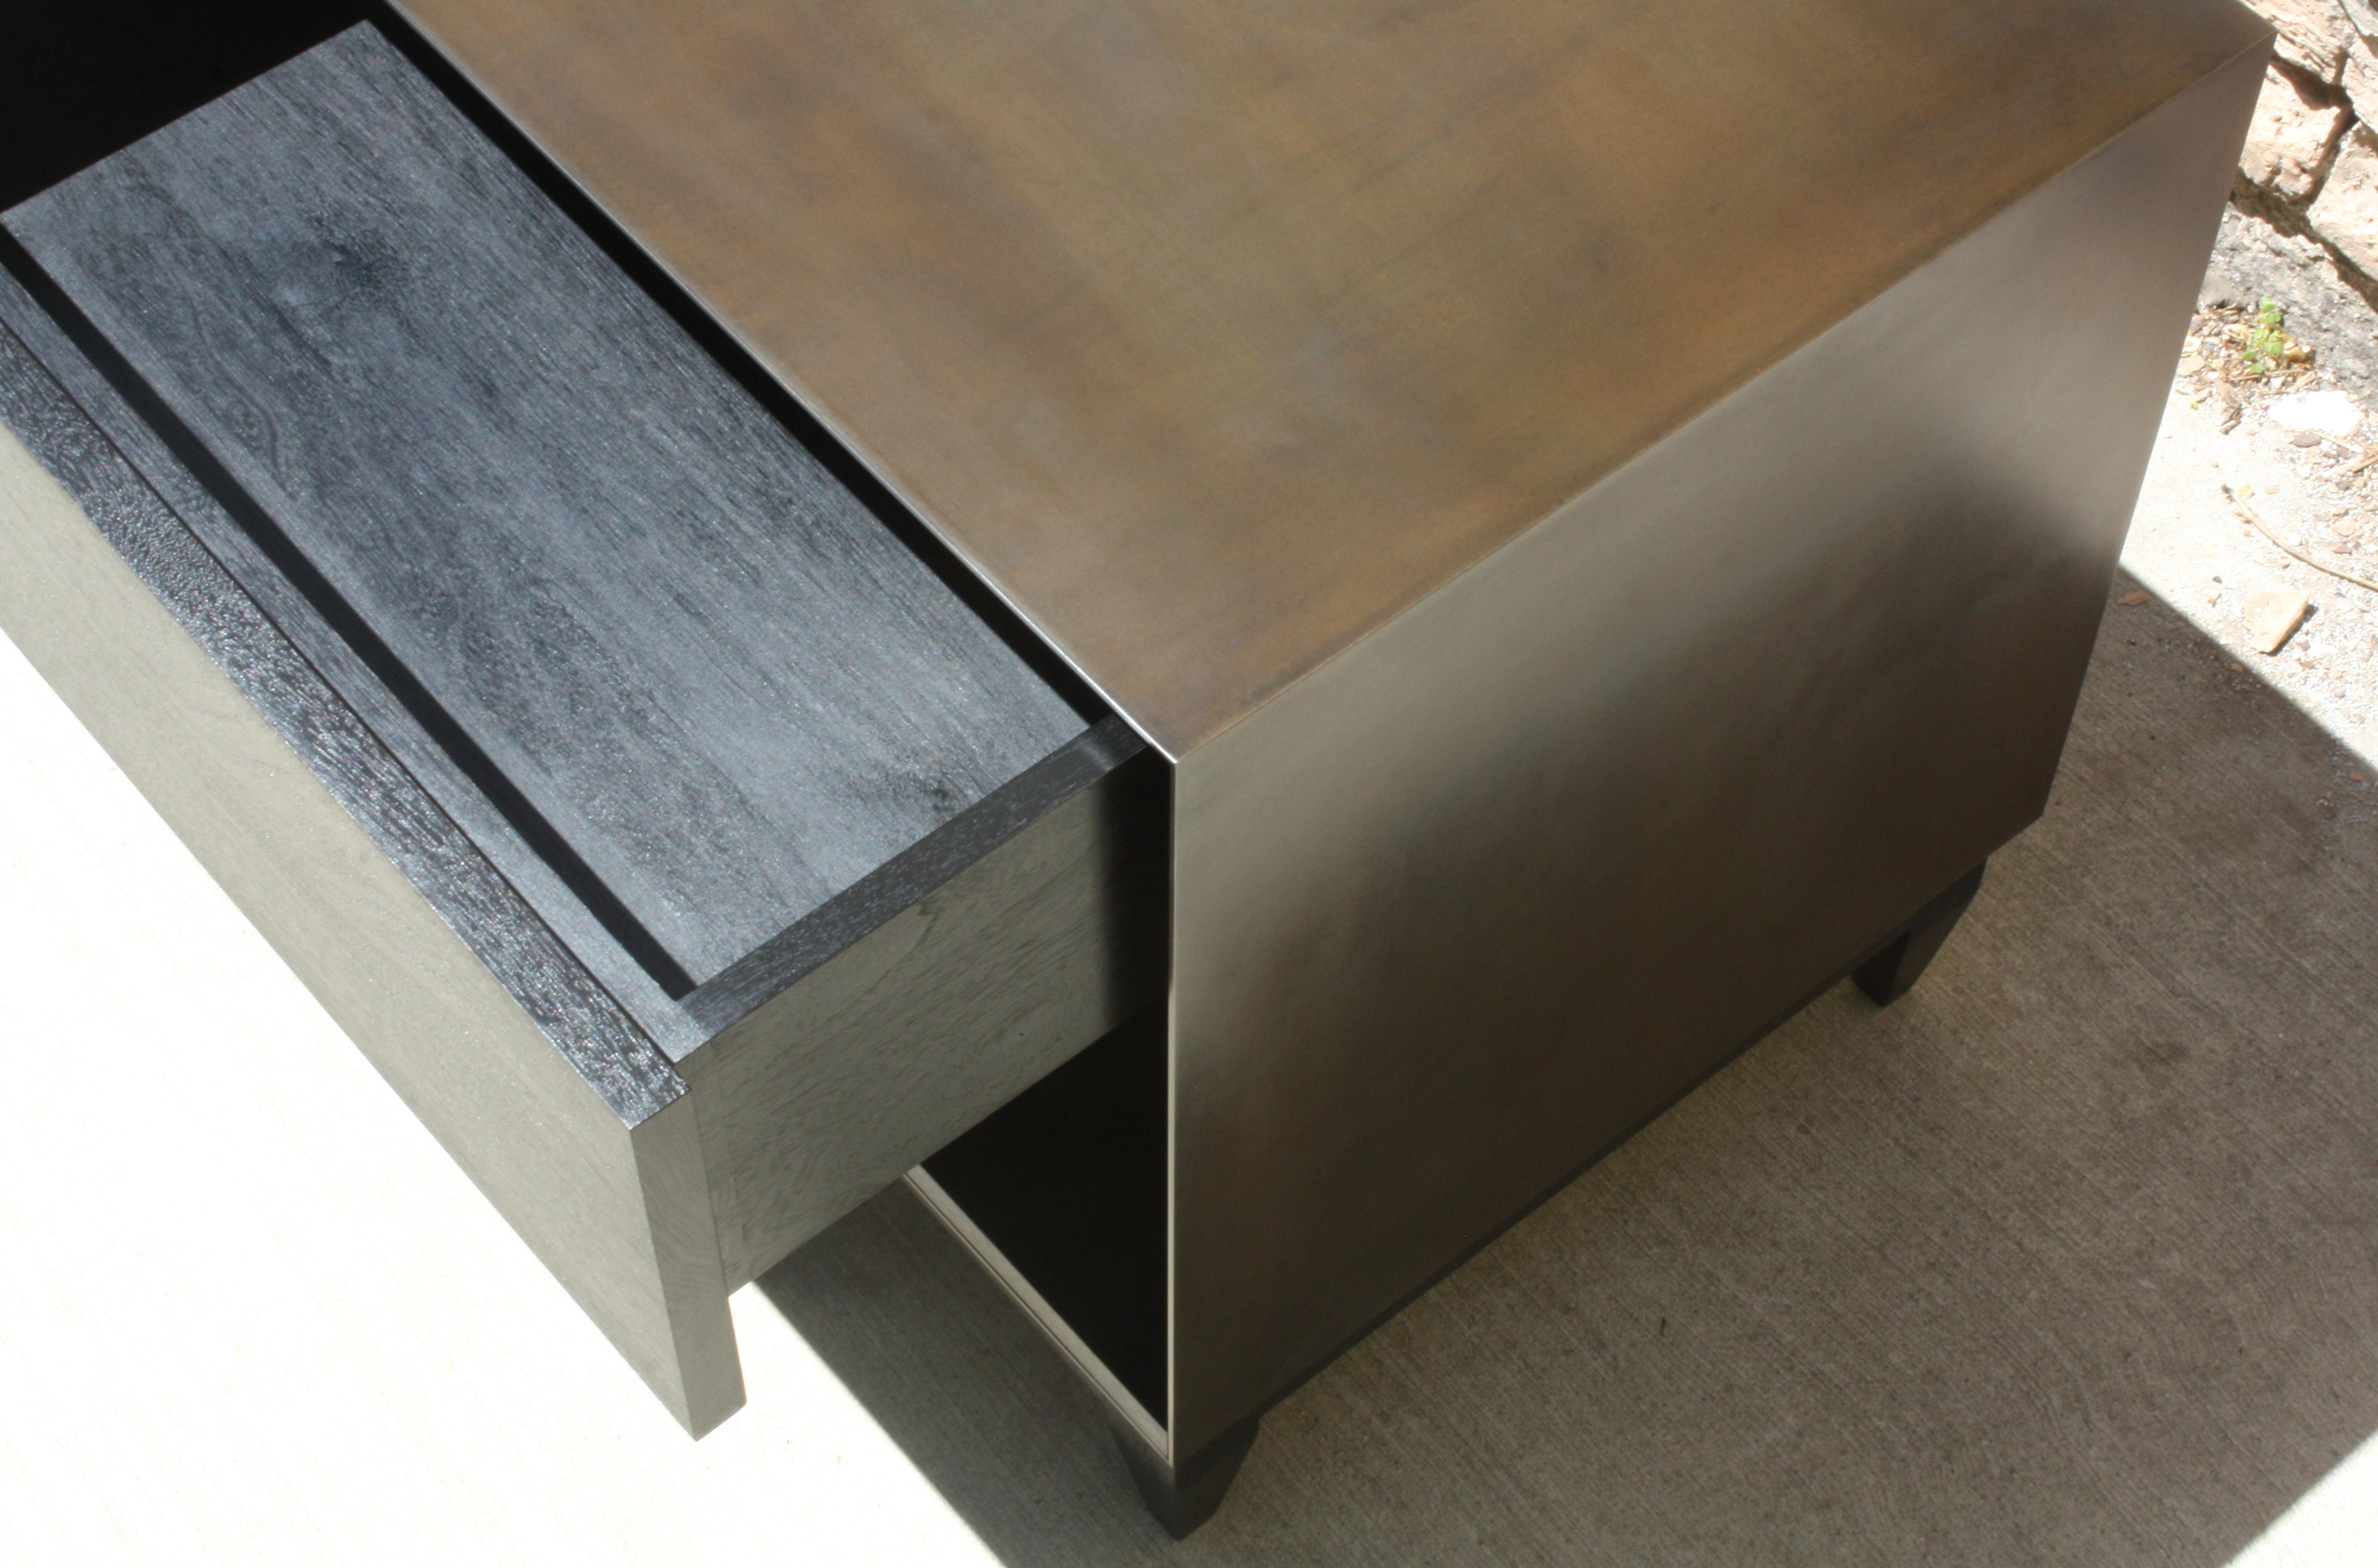 Oxide Blackened Steel and Walnut Nightstand with Integrated Power Bocci 22system For Sale 4